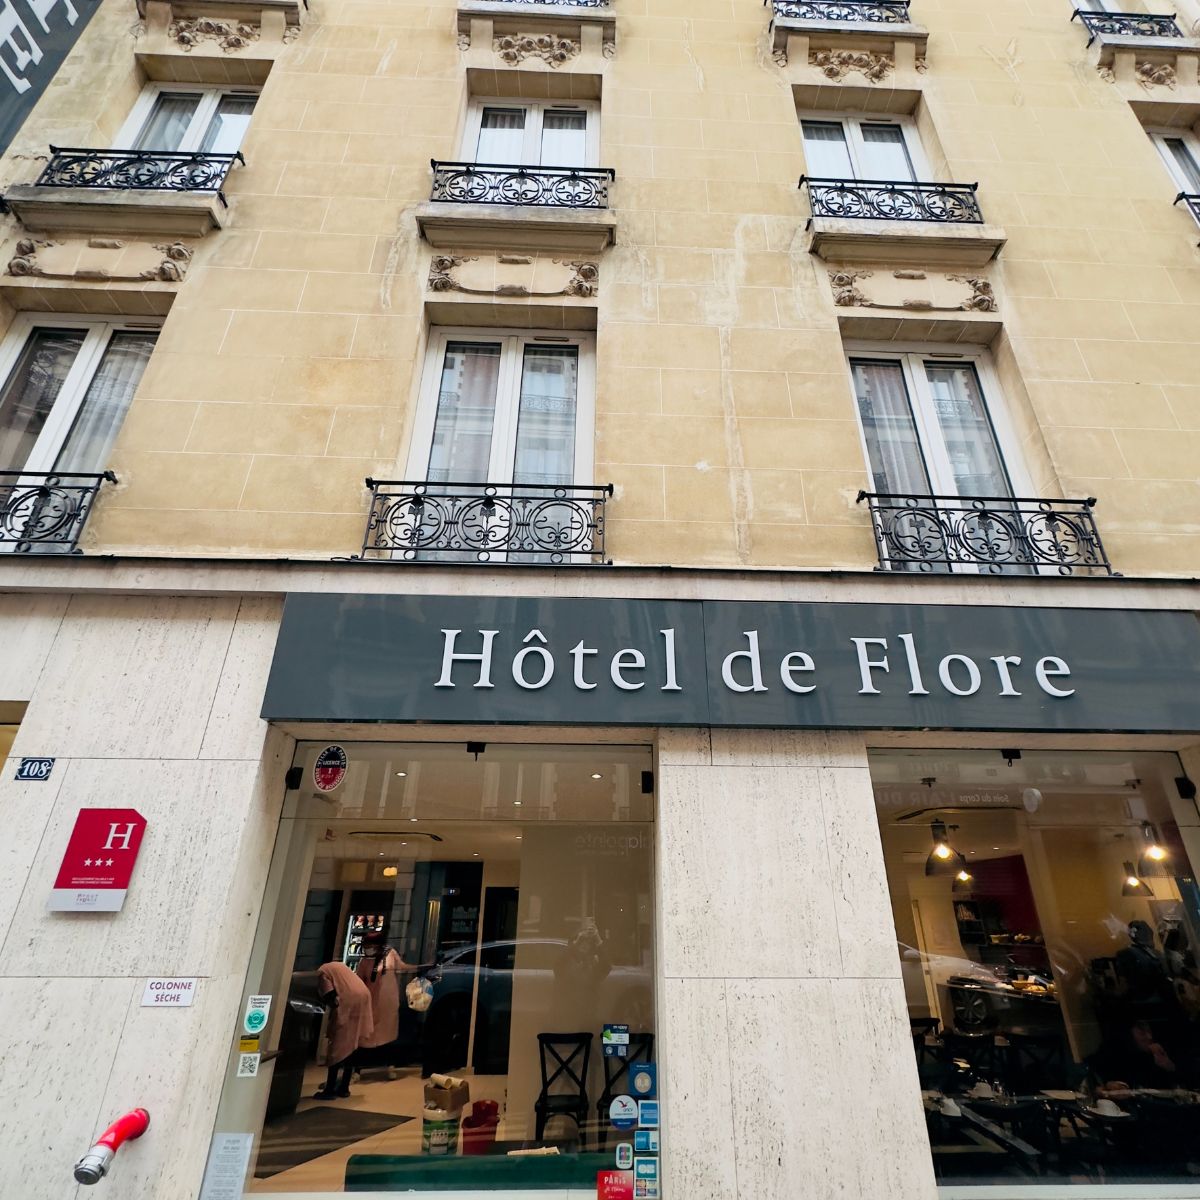 The front of a hotel in France. The sign says "Hotel de Flore"